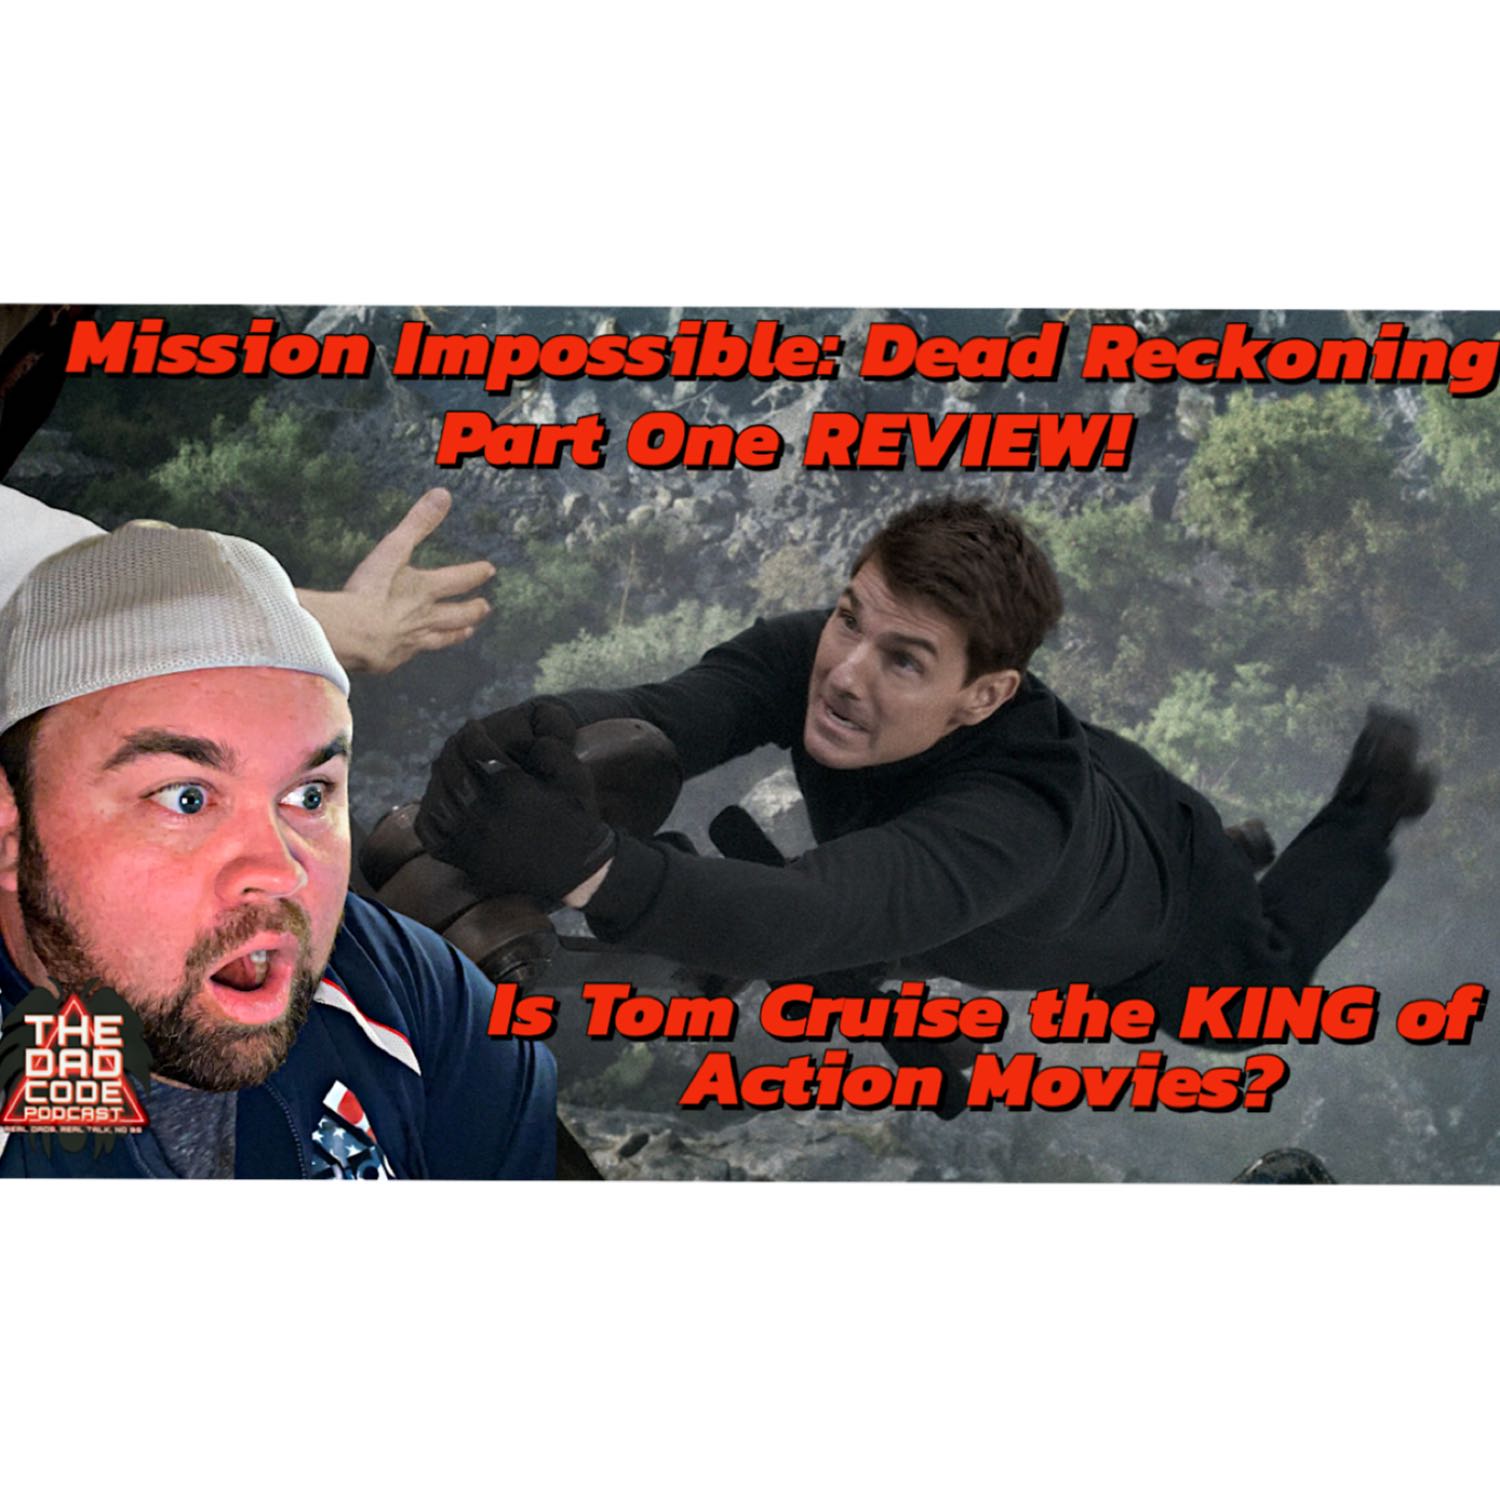 Is Tom Cruise the KING of Action Movies? Mission Impossible: Dark Reckoning, Part 1 REVIEW!!!